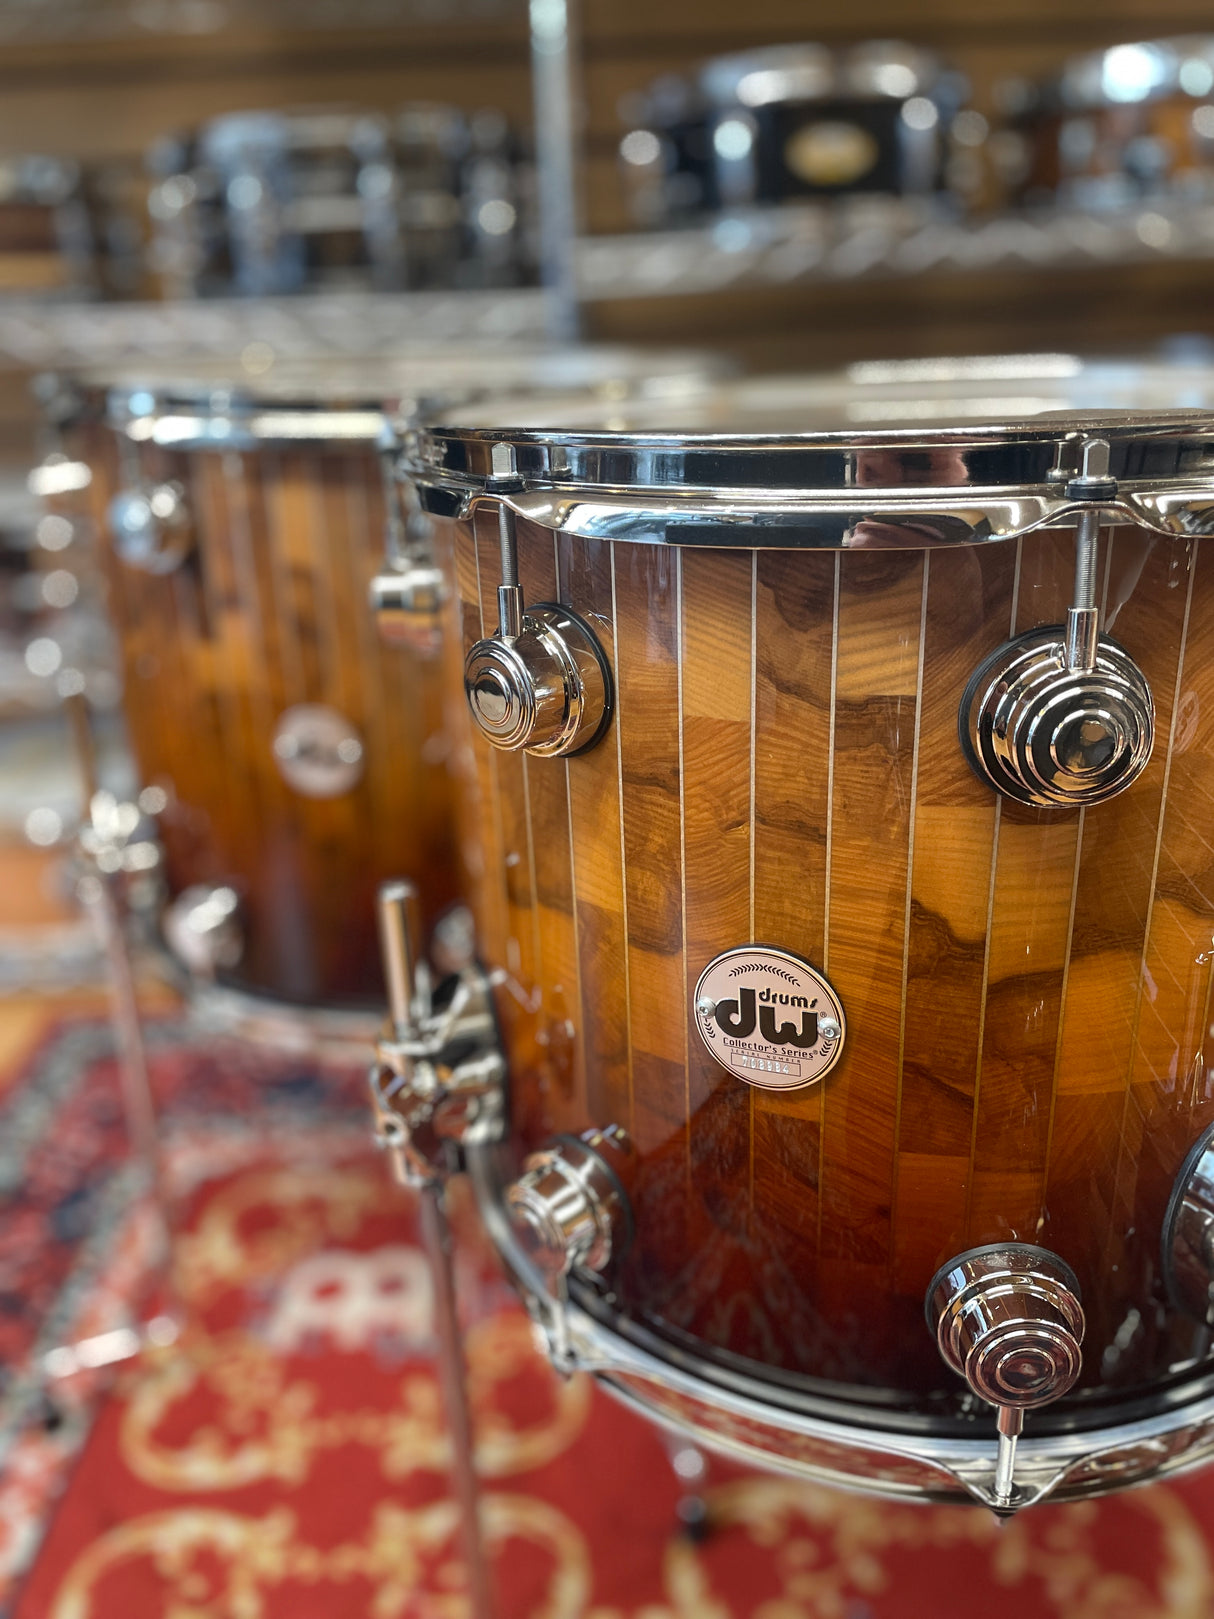 DW Collector's Series Exotic 22"/10"/12"/14"/16" Shell Pack in Natural to Tobacco Fade over Olive Ash Pinstripe